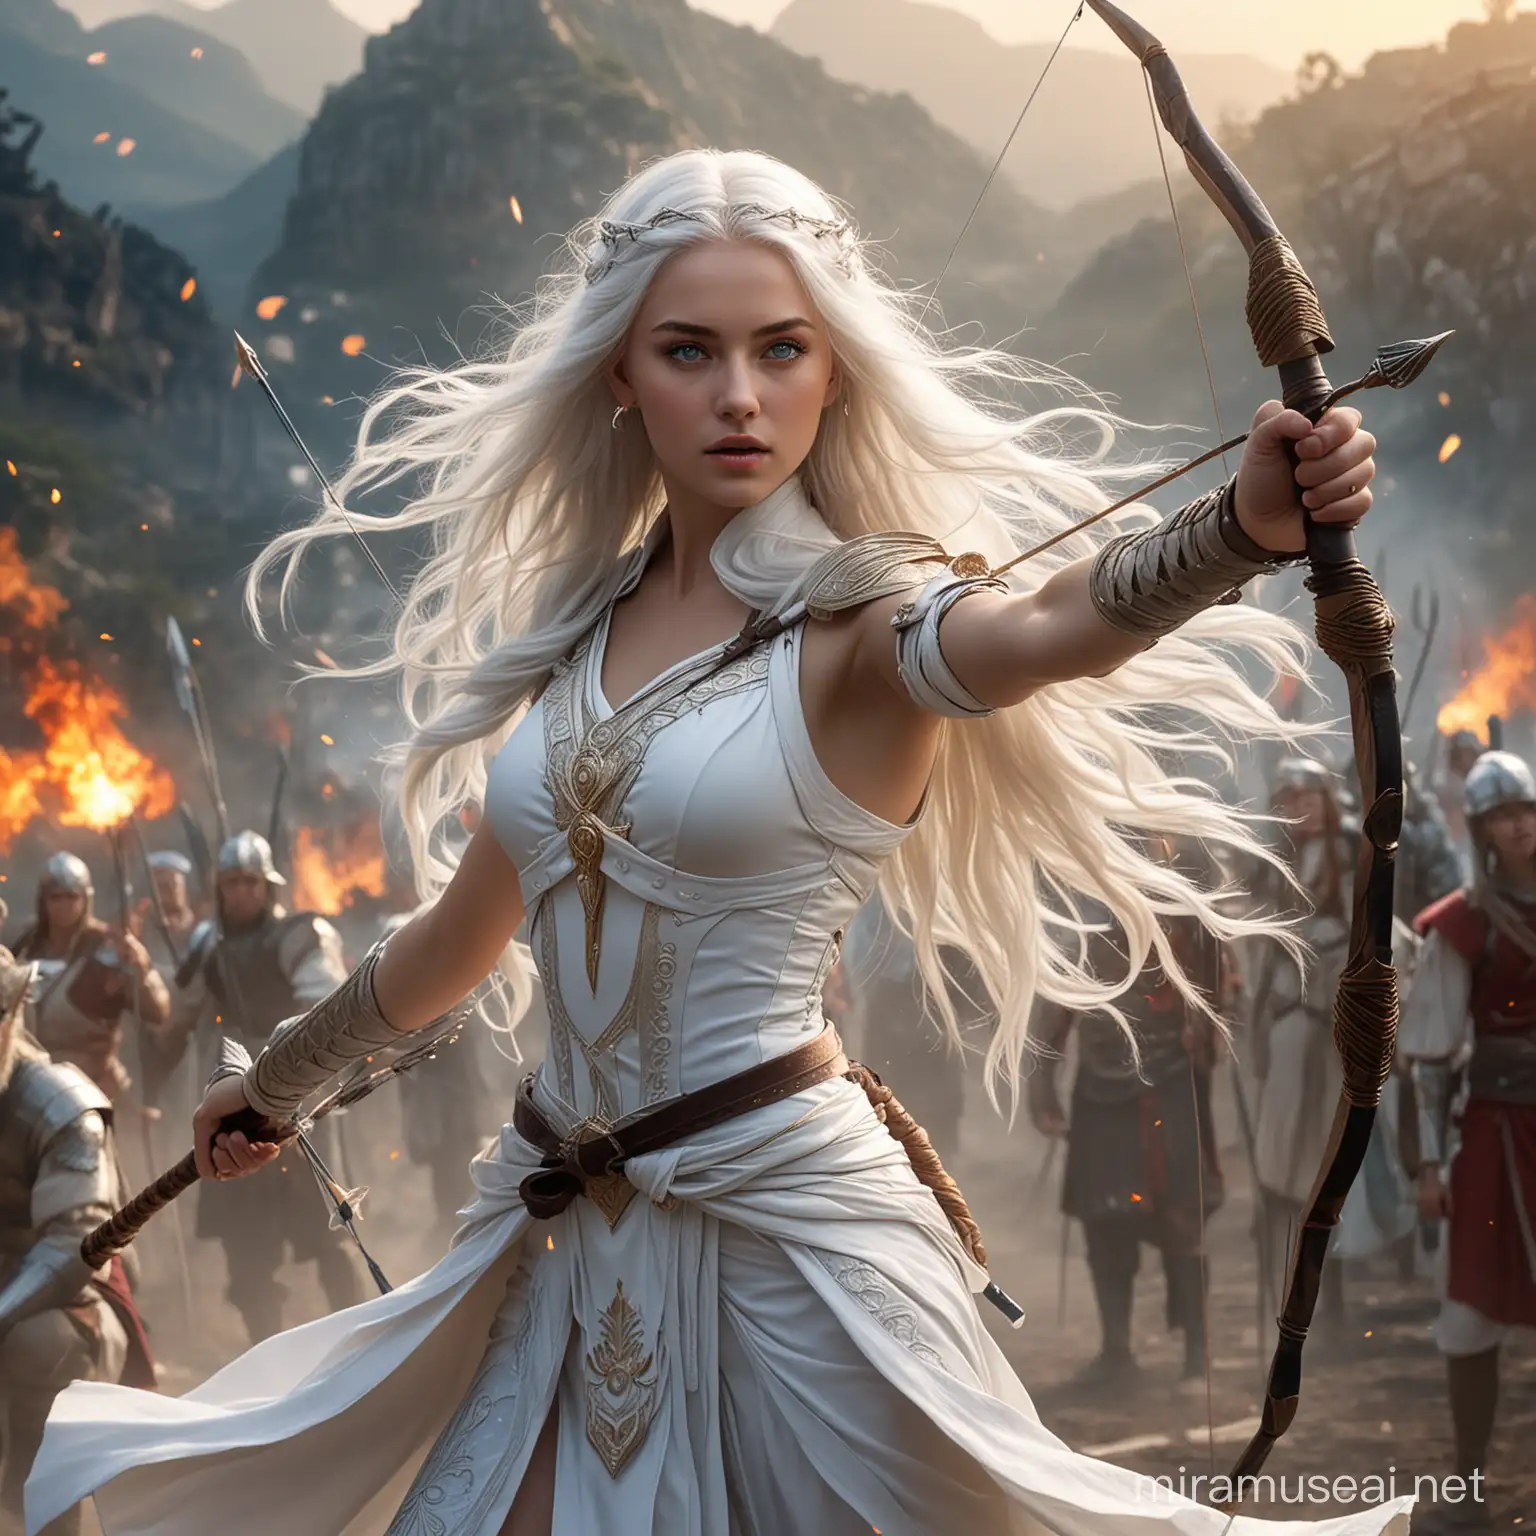 Goddess Empresses in Cosmic Battle WhiteHaired Warriors Amidst Fiery Cosmic Power